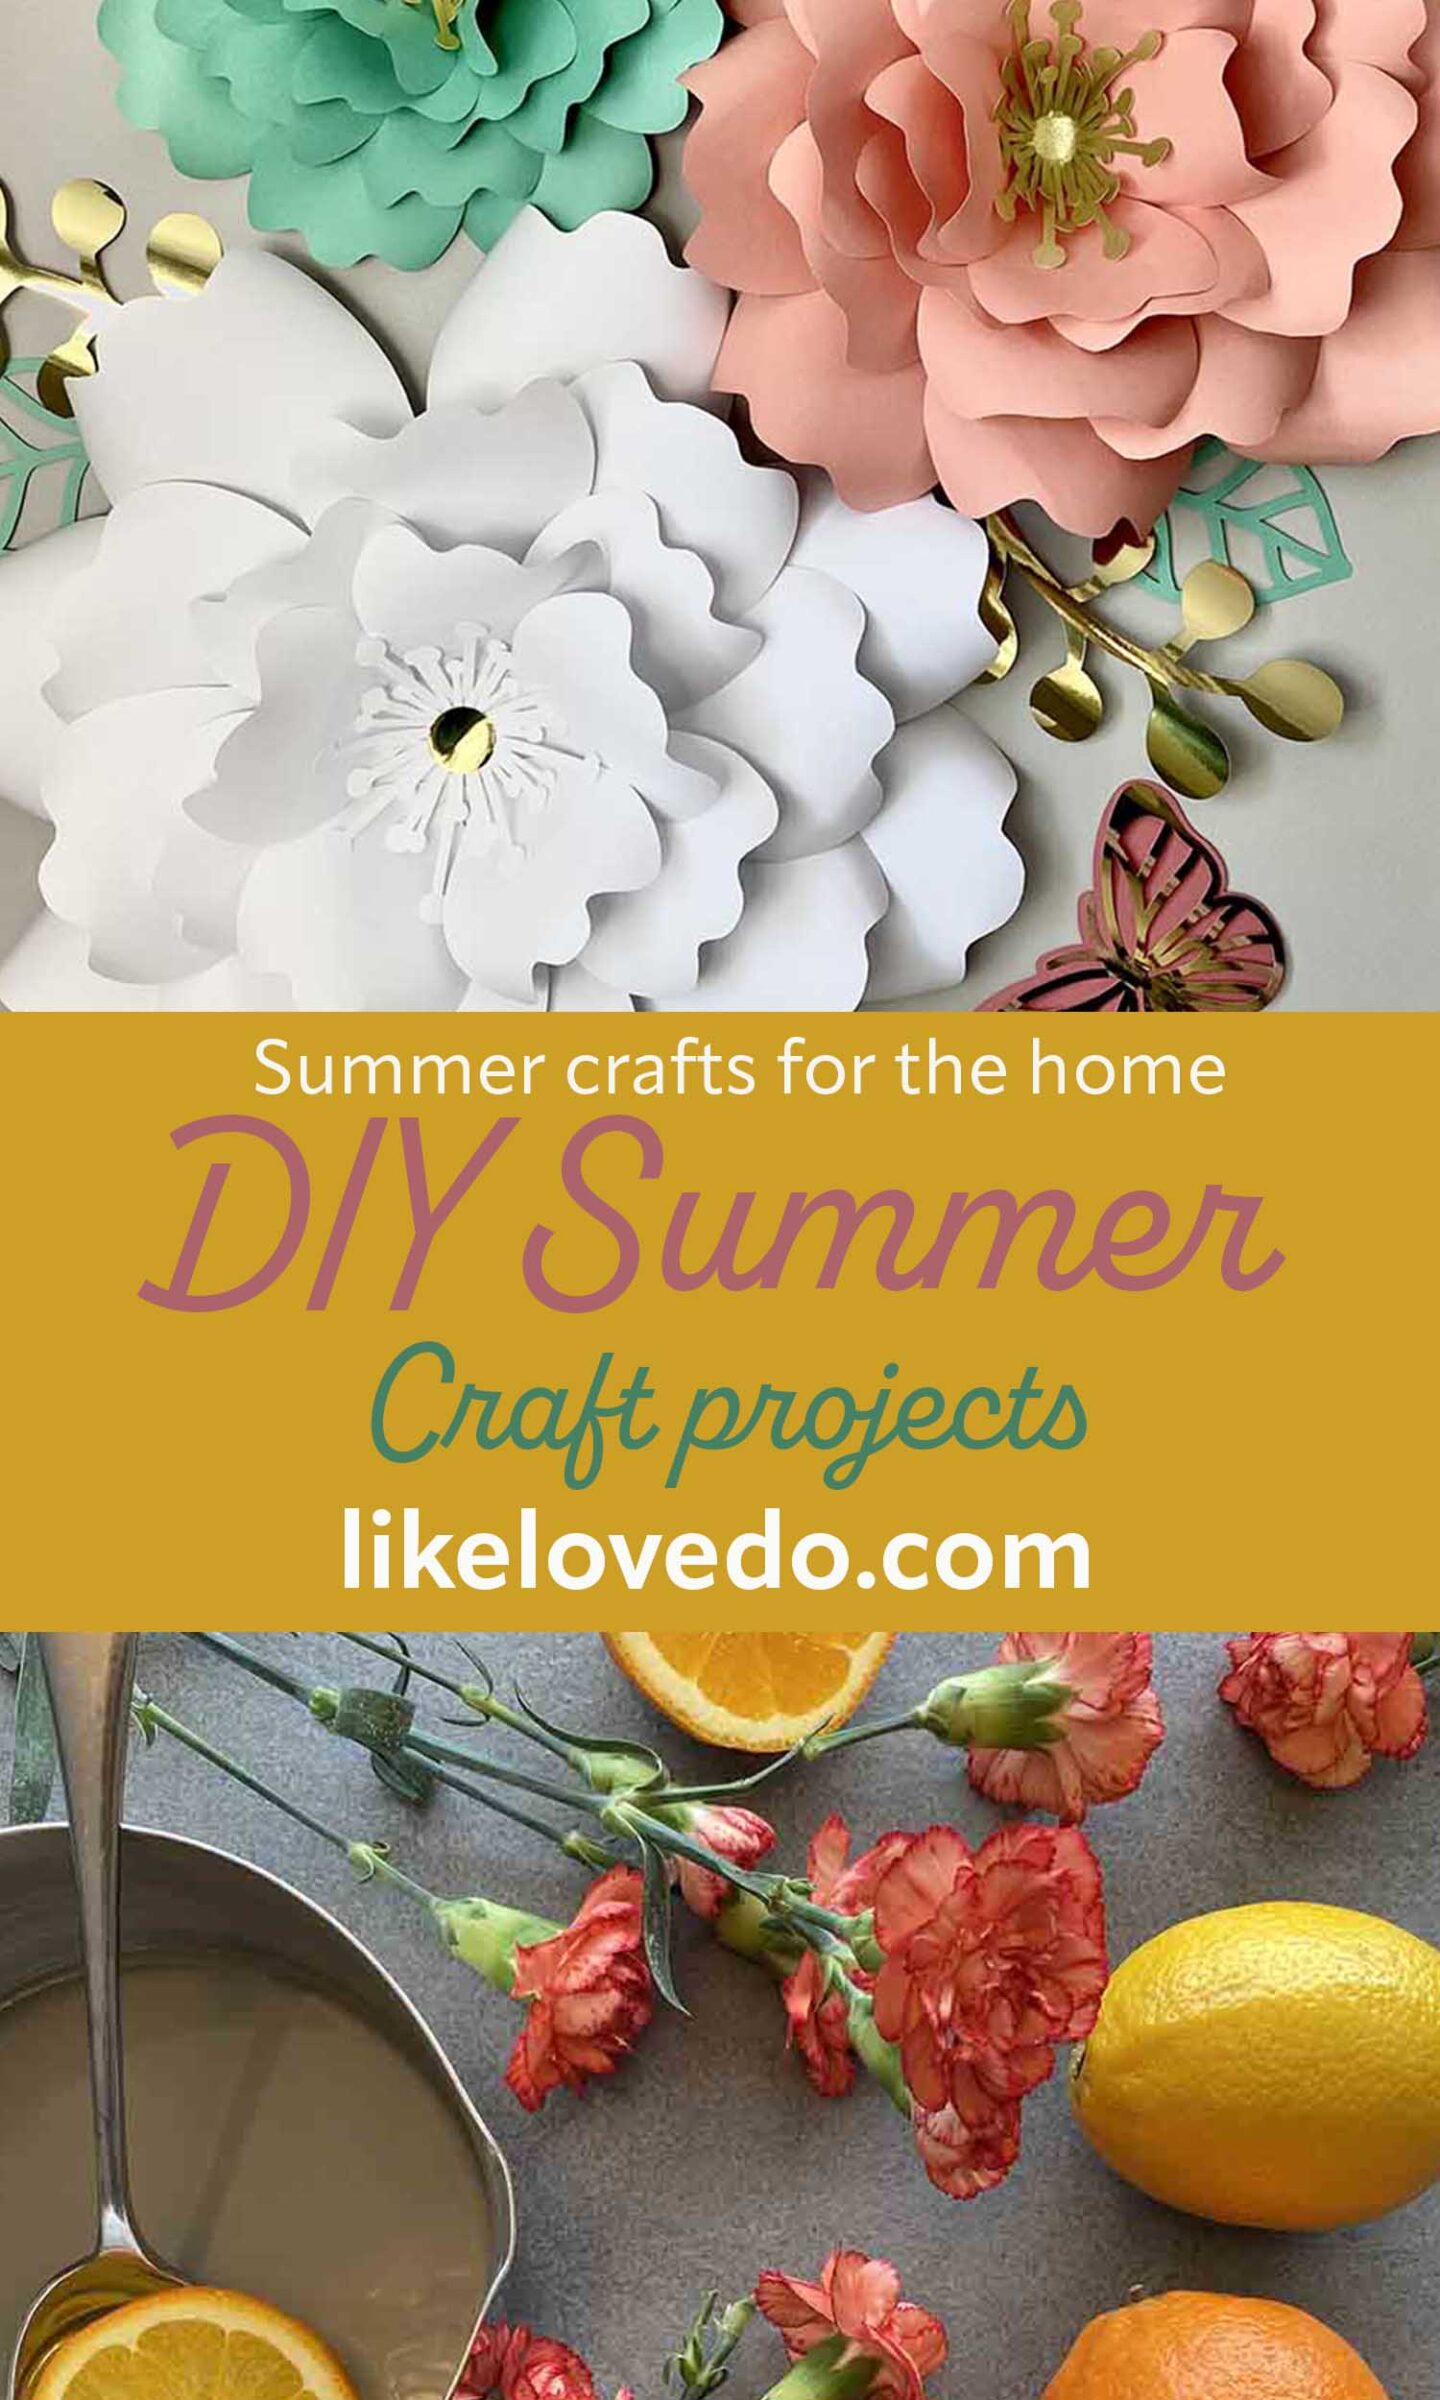 DIY summer craft projects and ideas for the home pin image